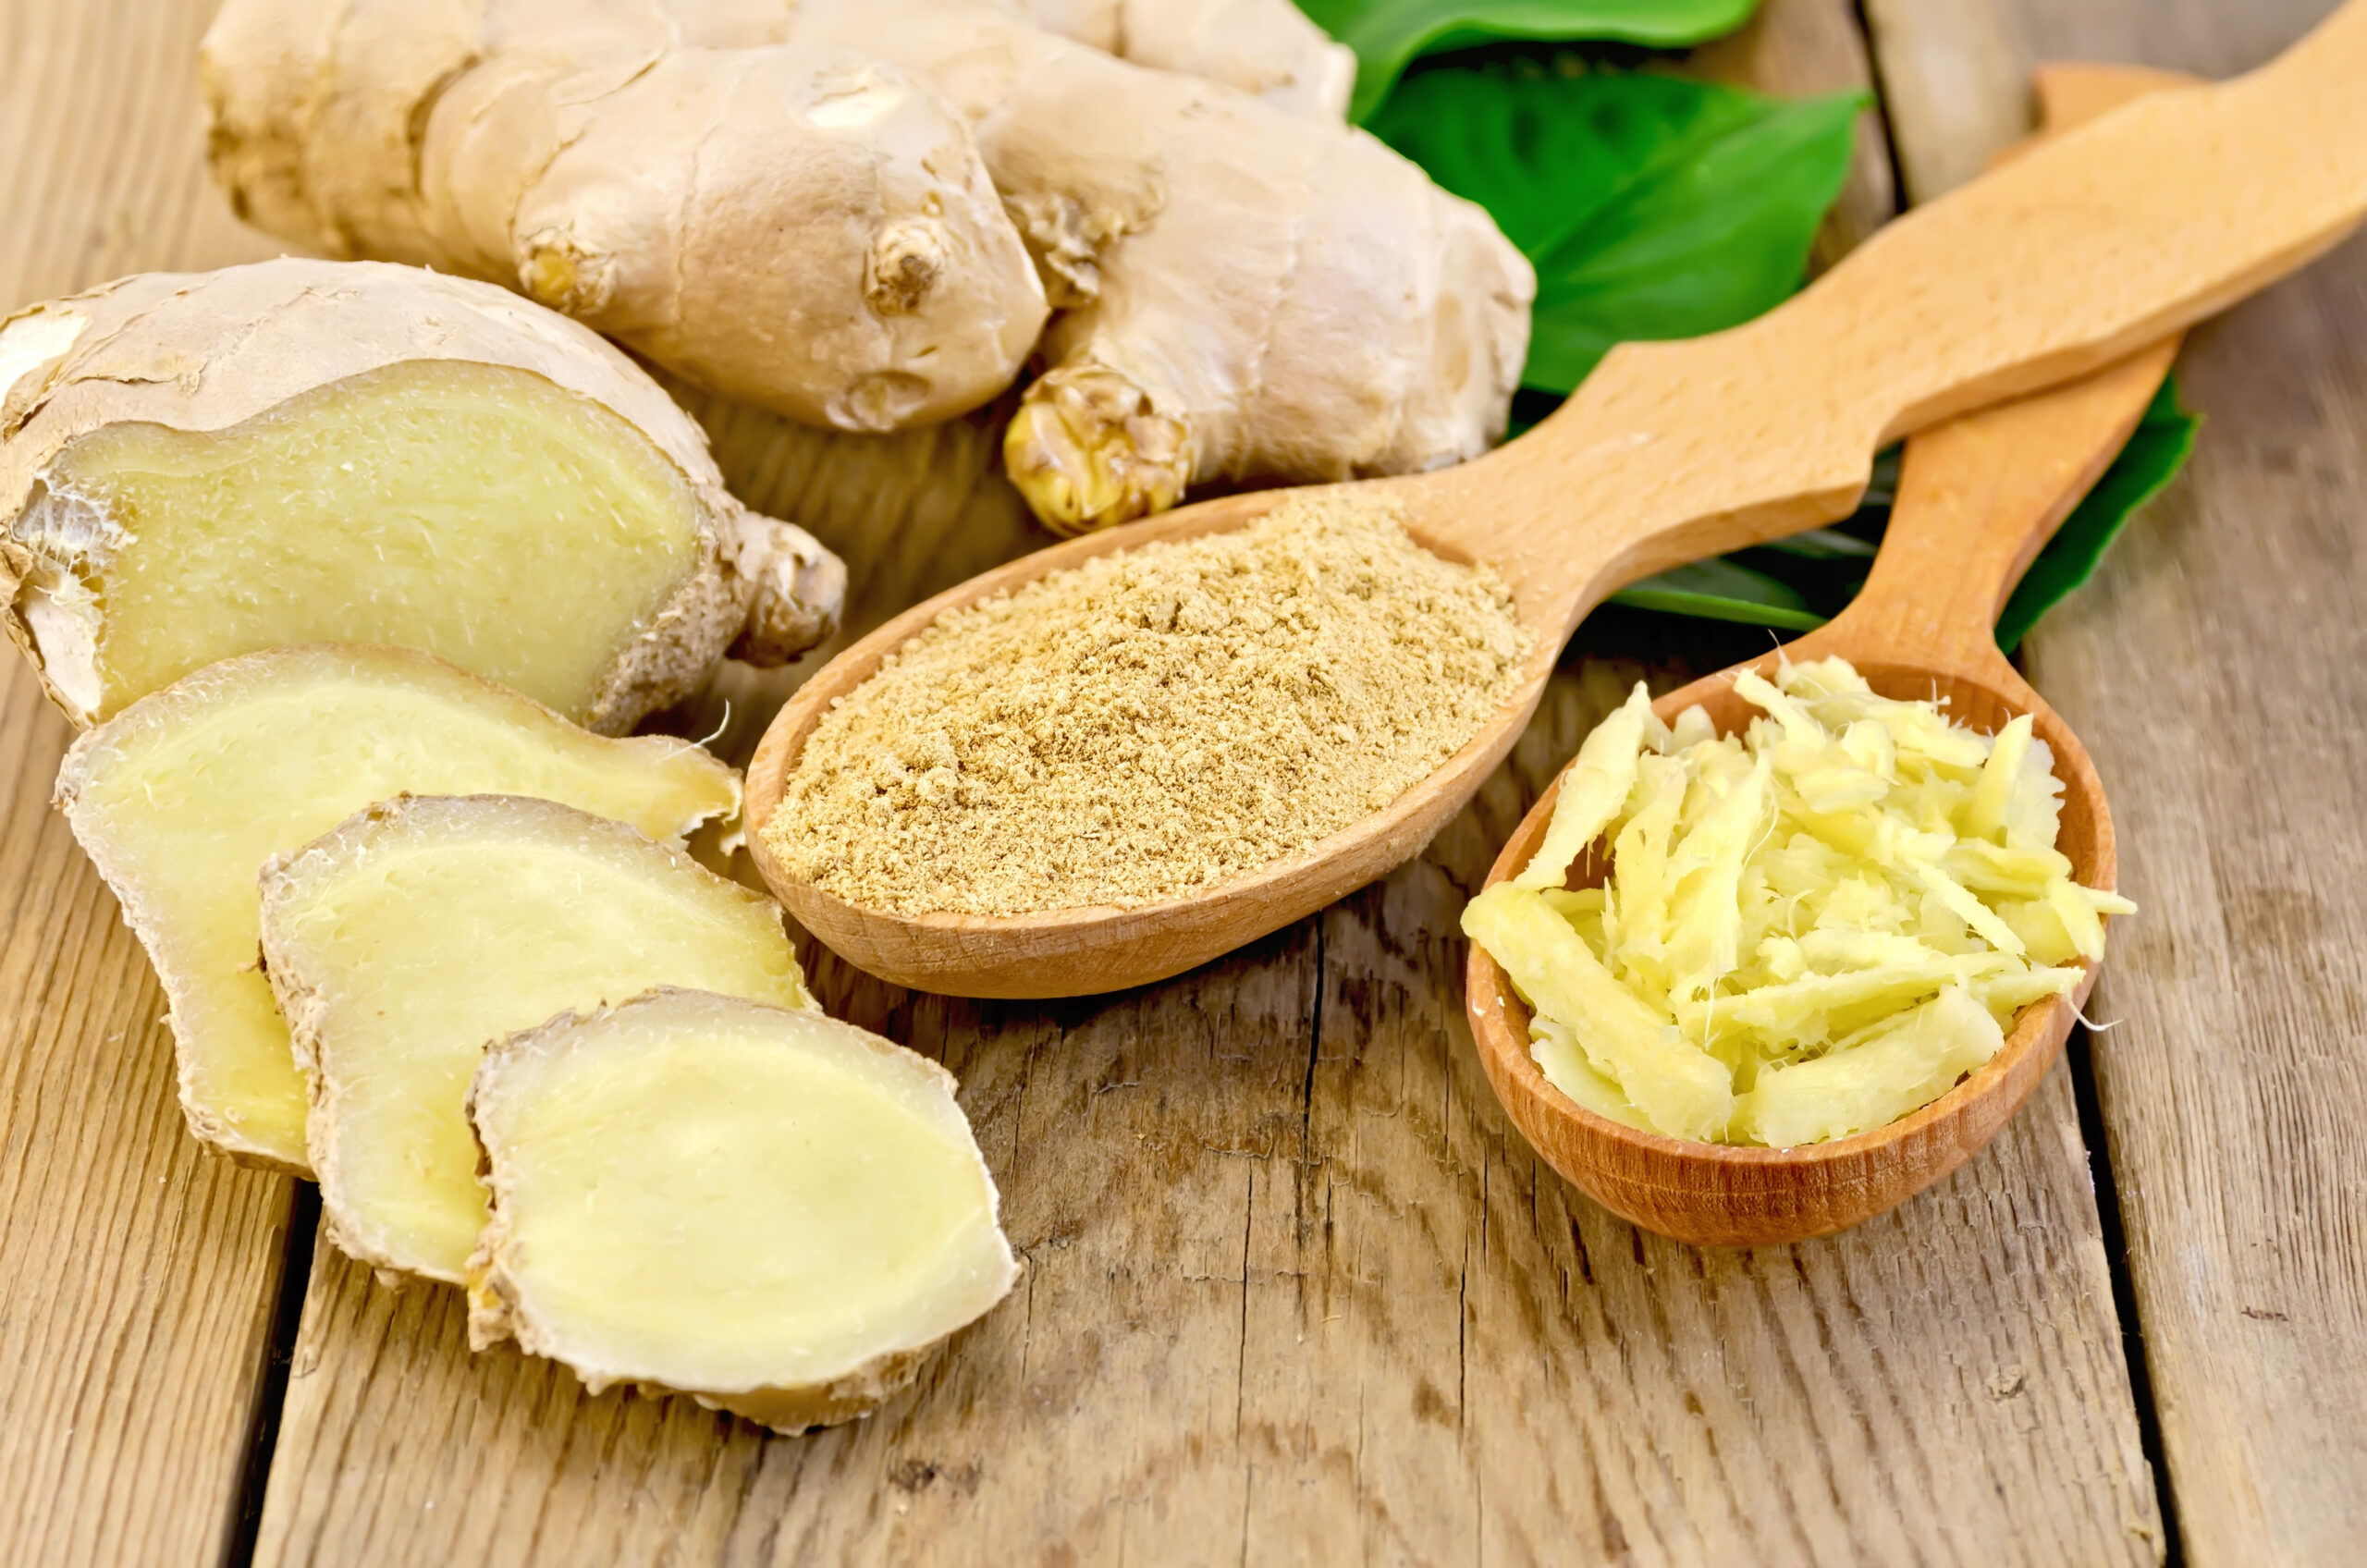 Can Ginger Effectively And Safely Be Used To Treat Nausea?